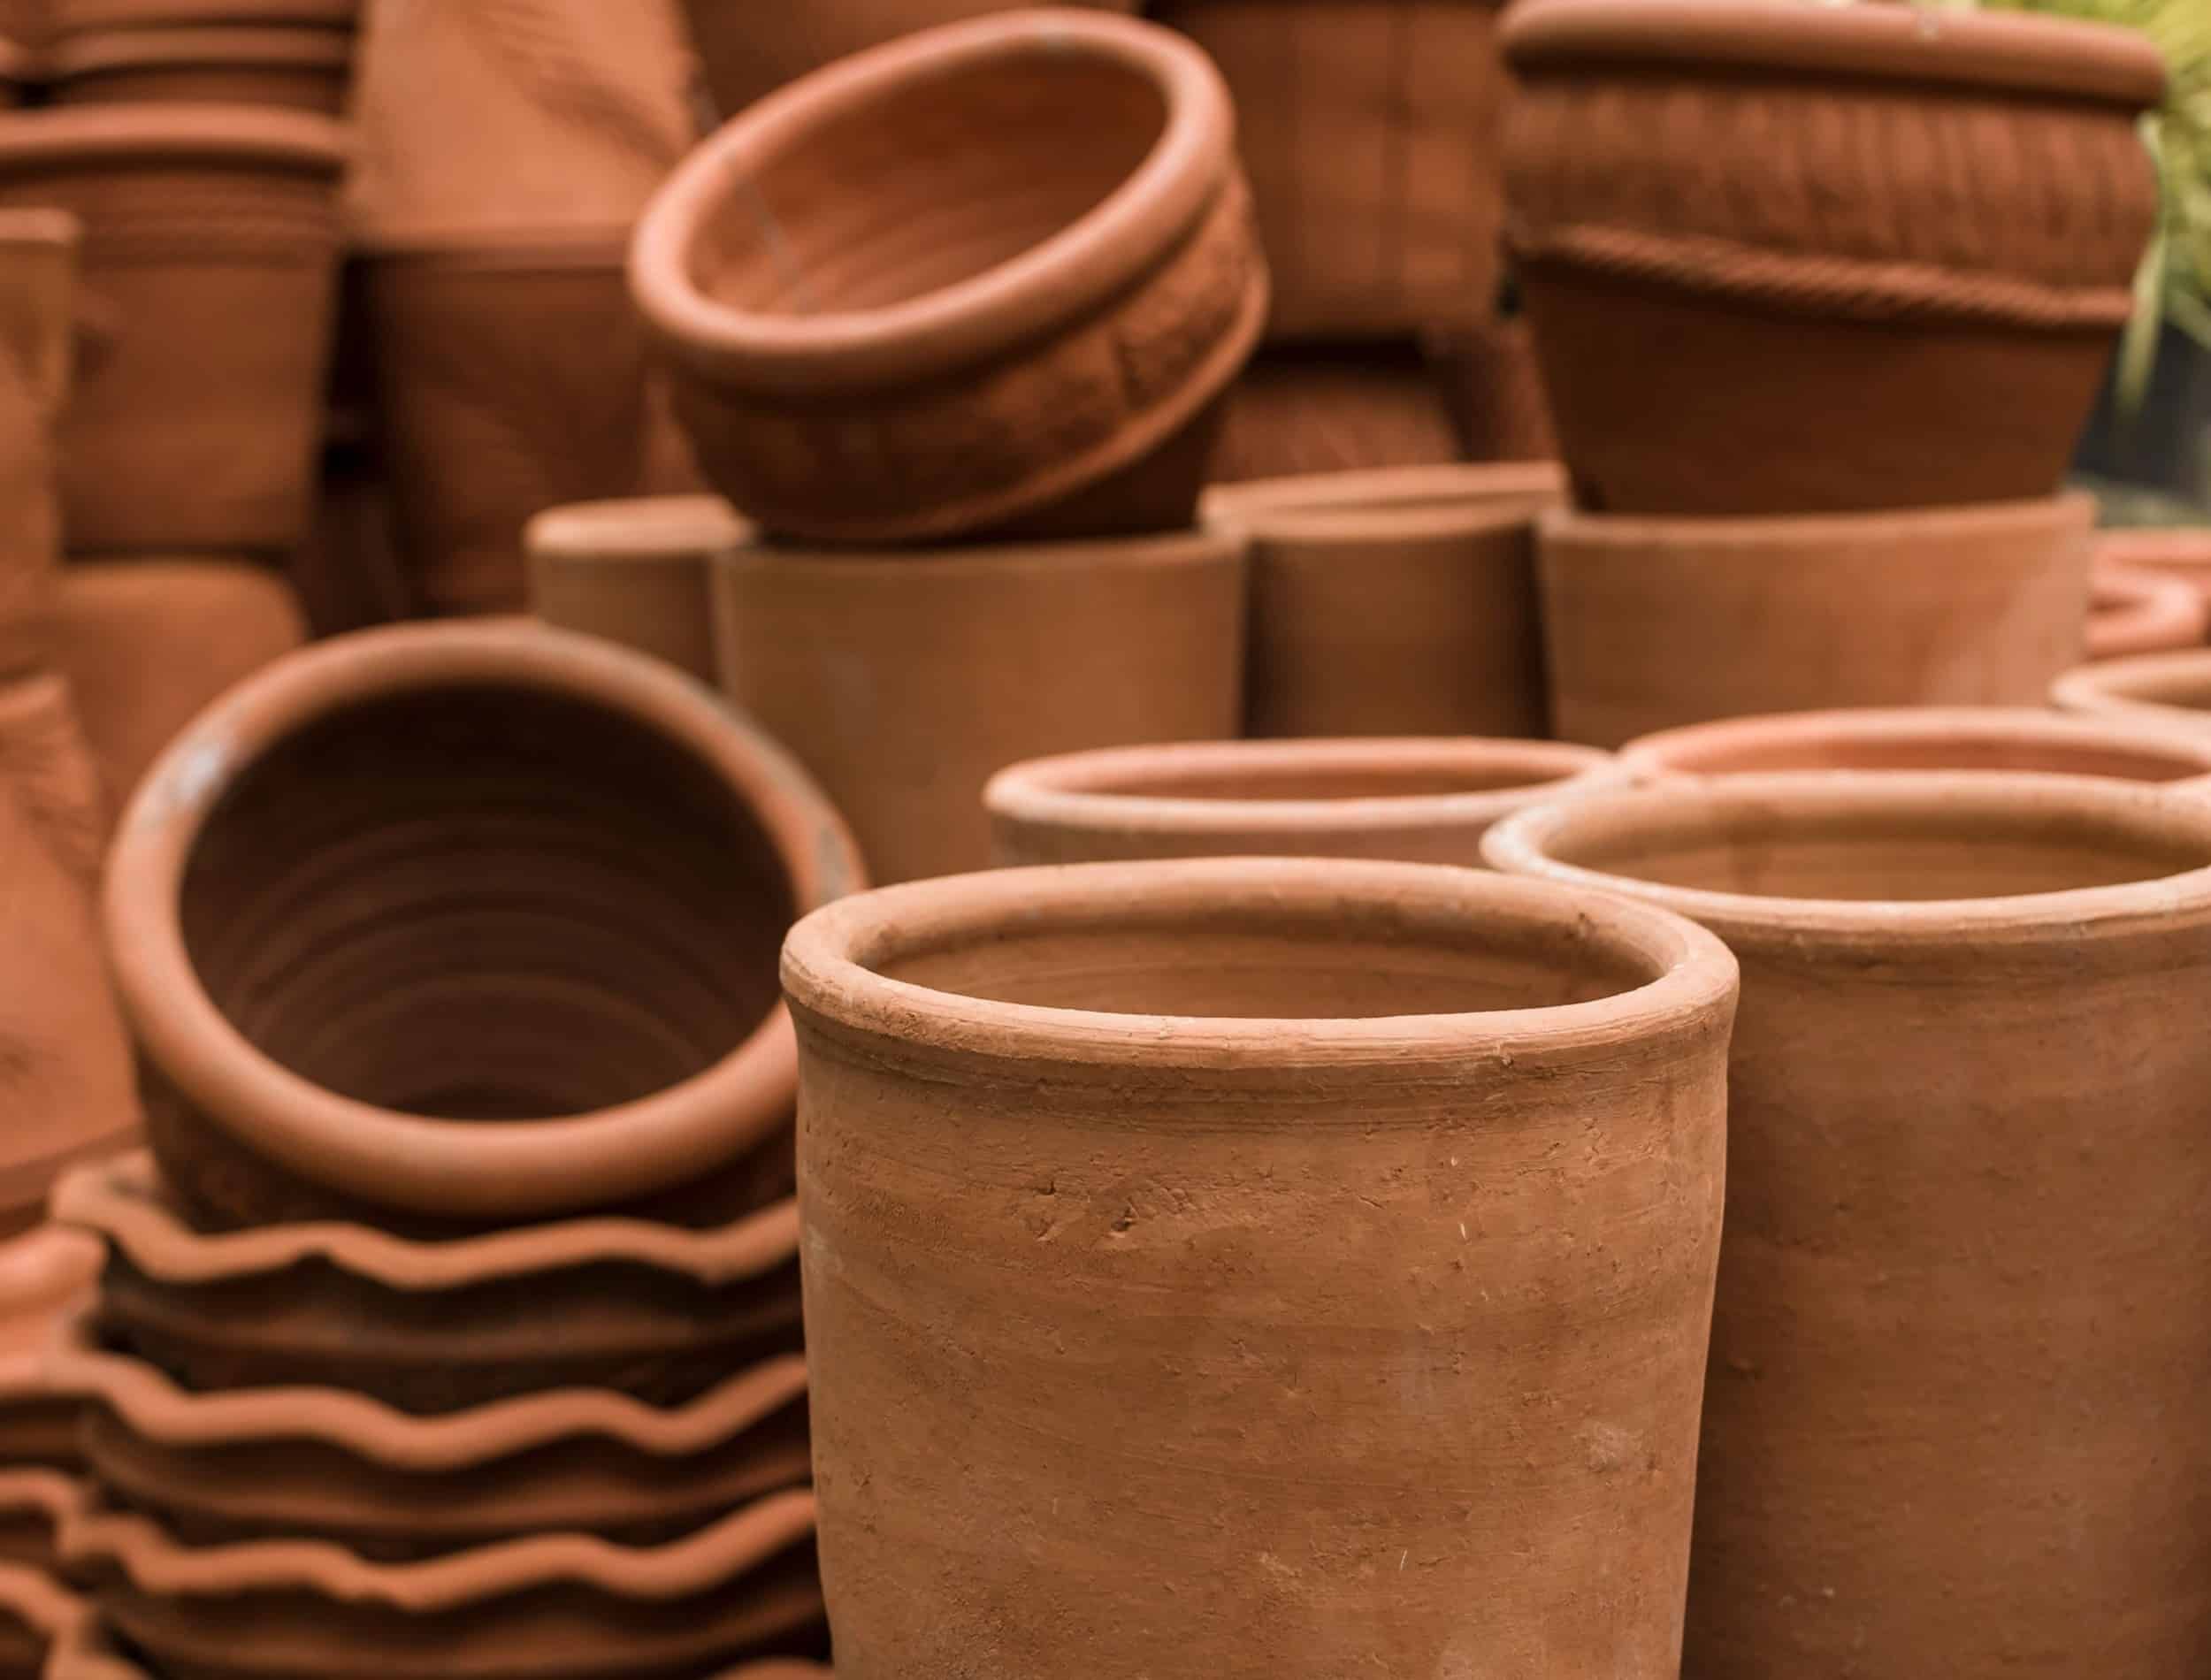 Stacks of various terracotta pots for plants for sale at a garden store.